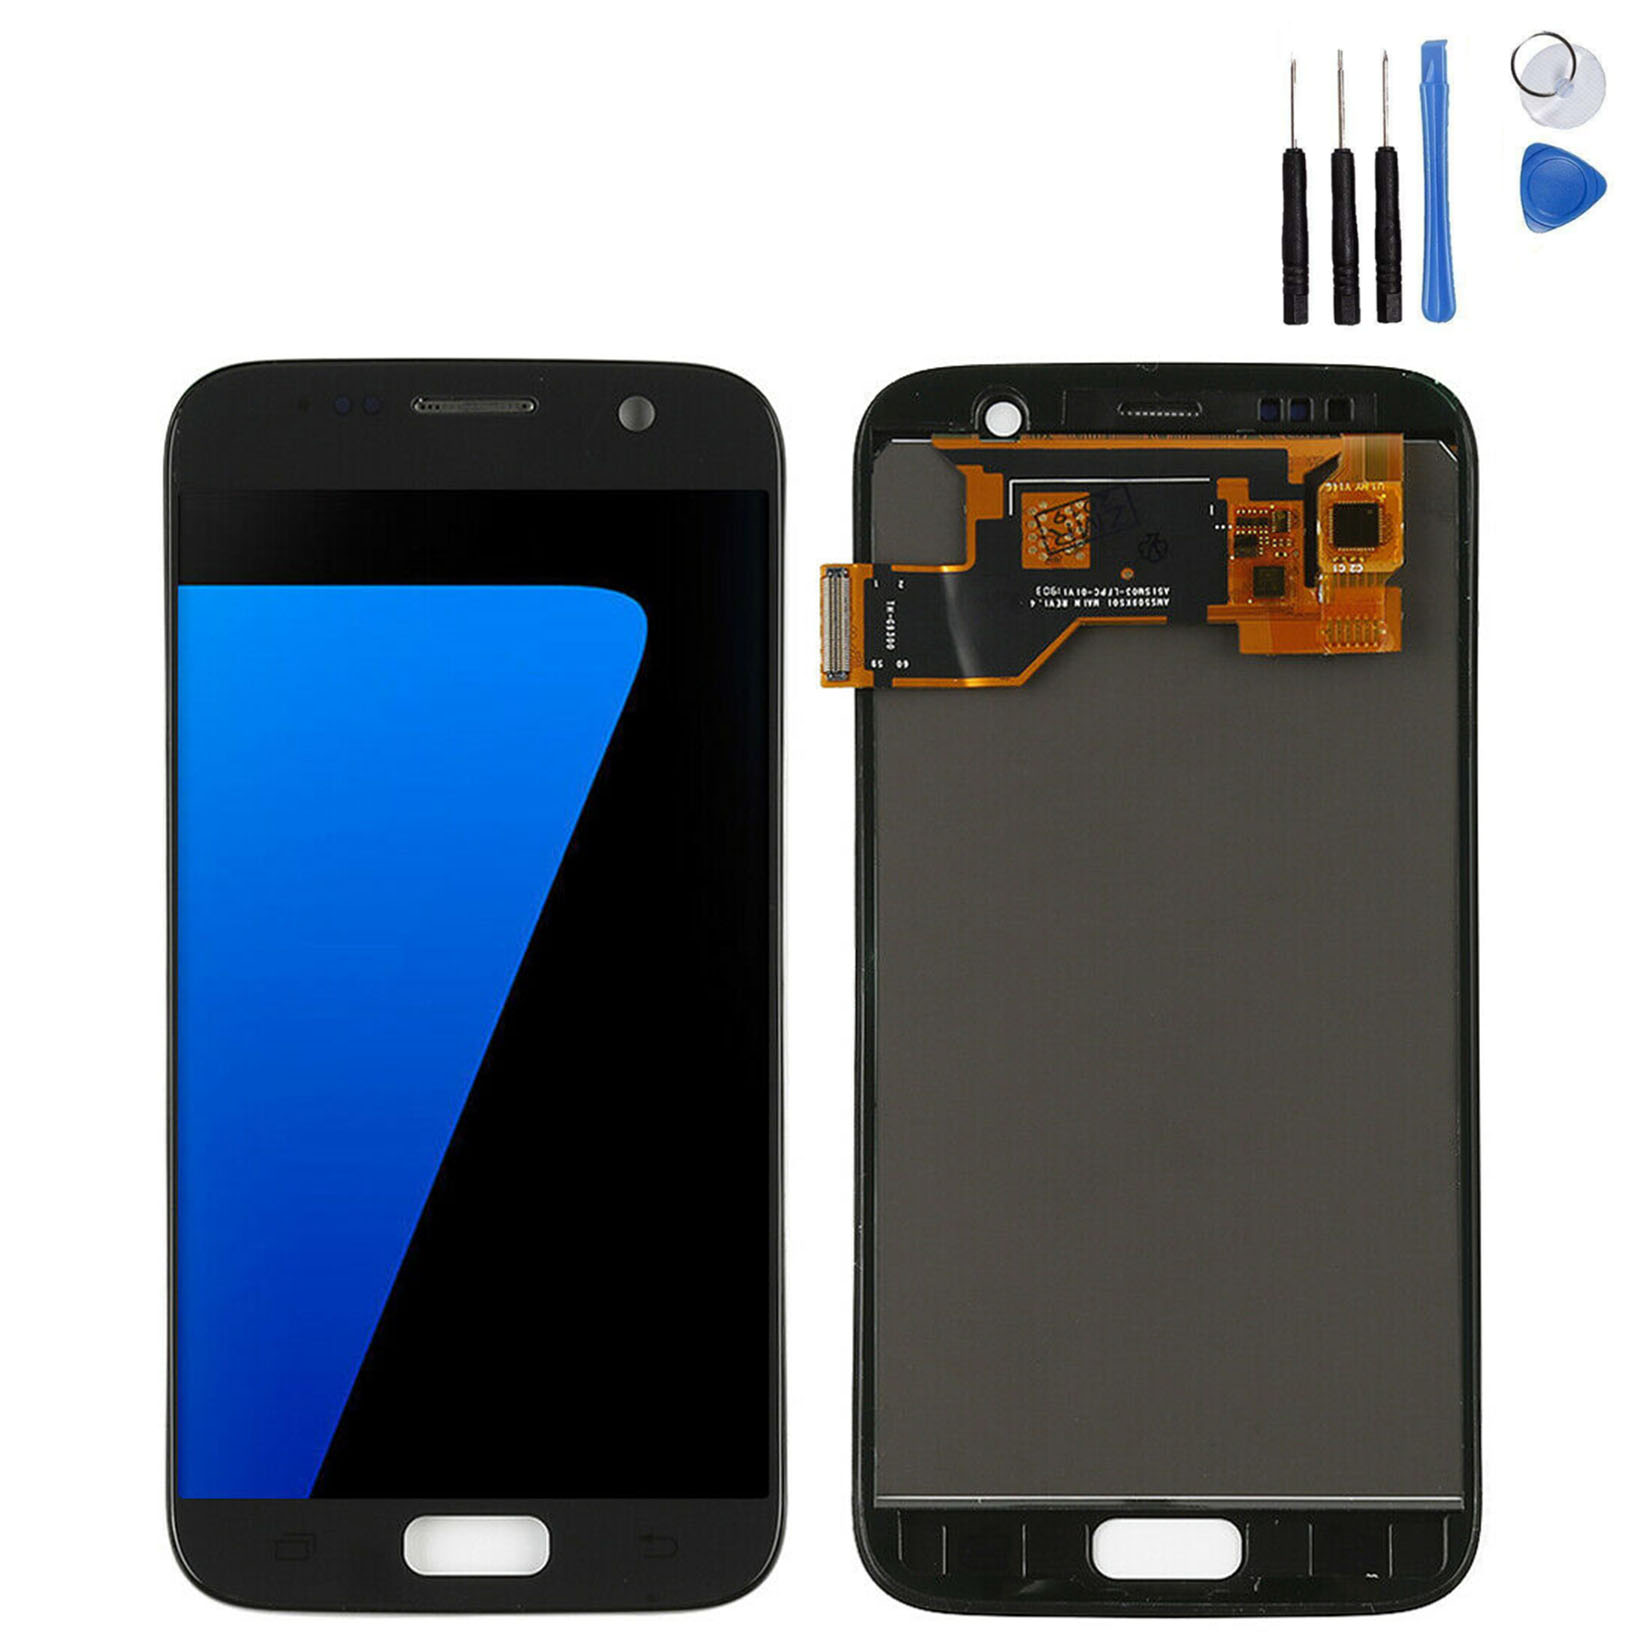 bell canada samsung s7 battery replacement